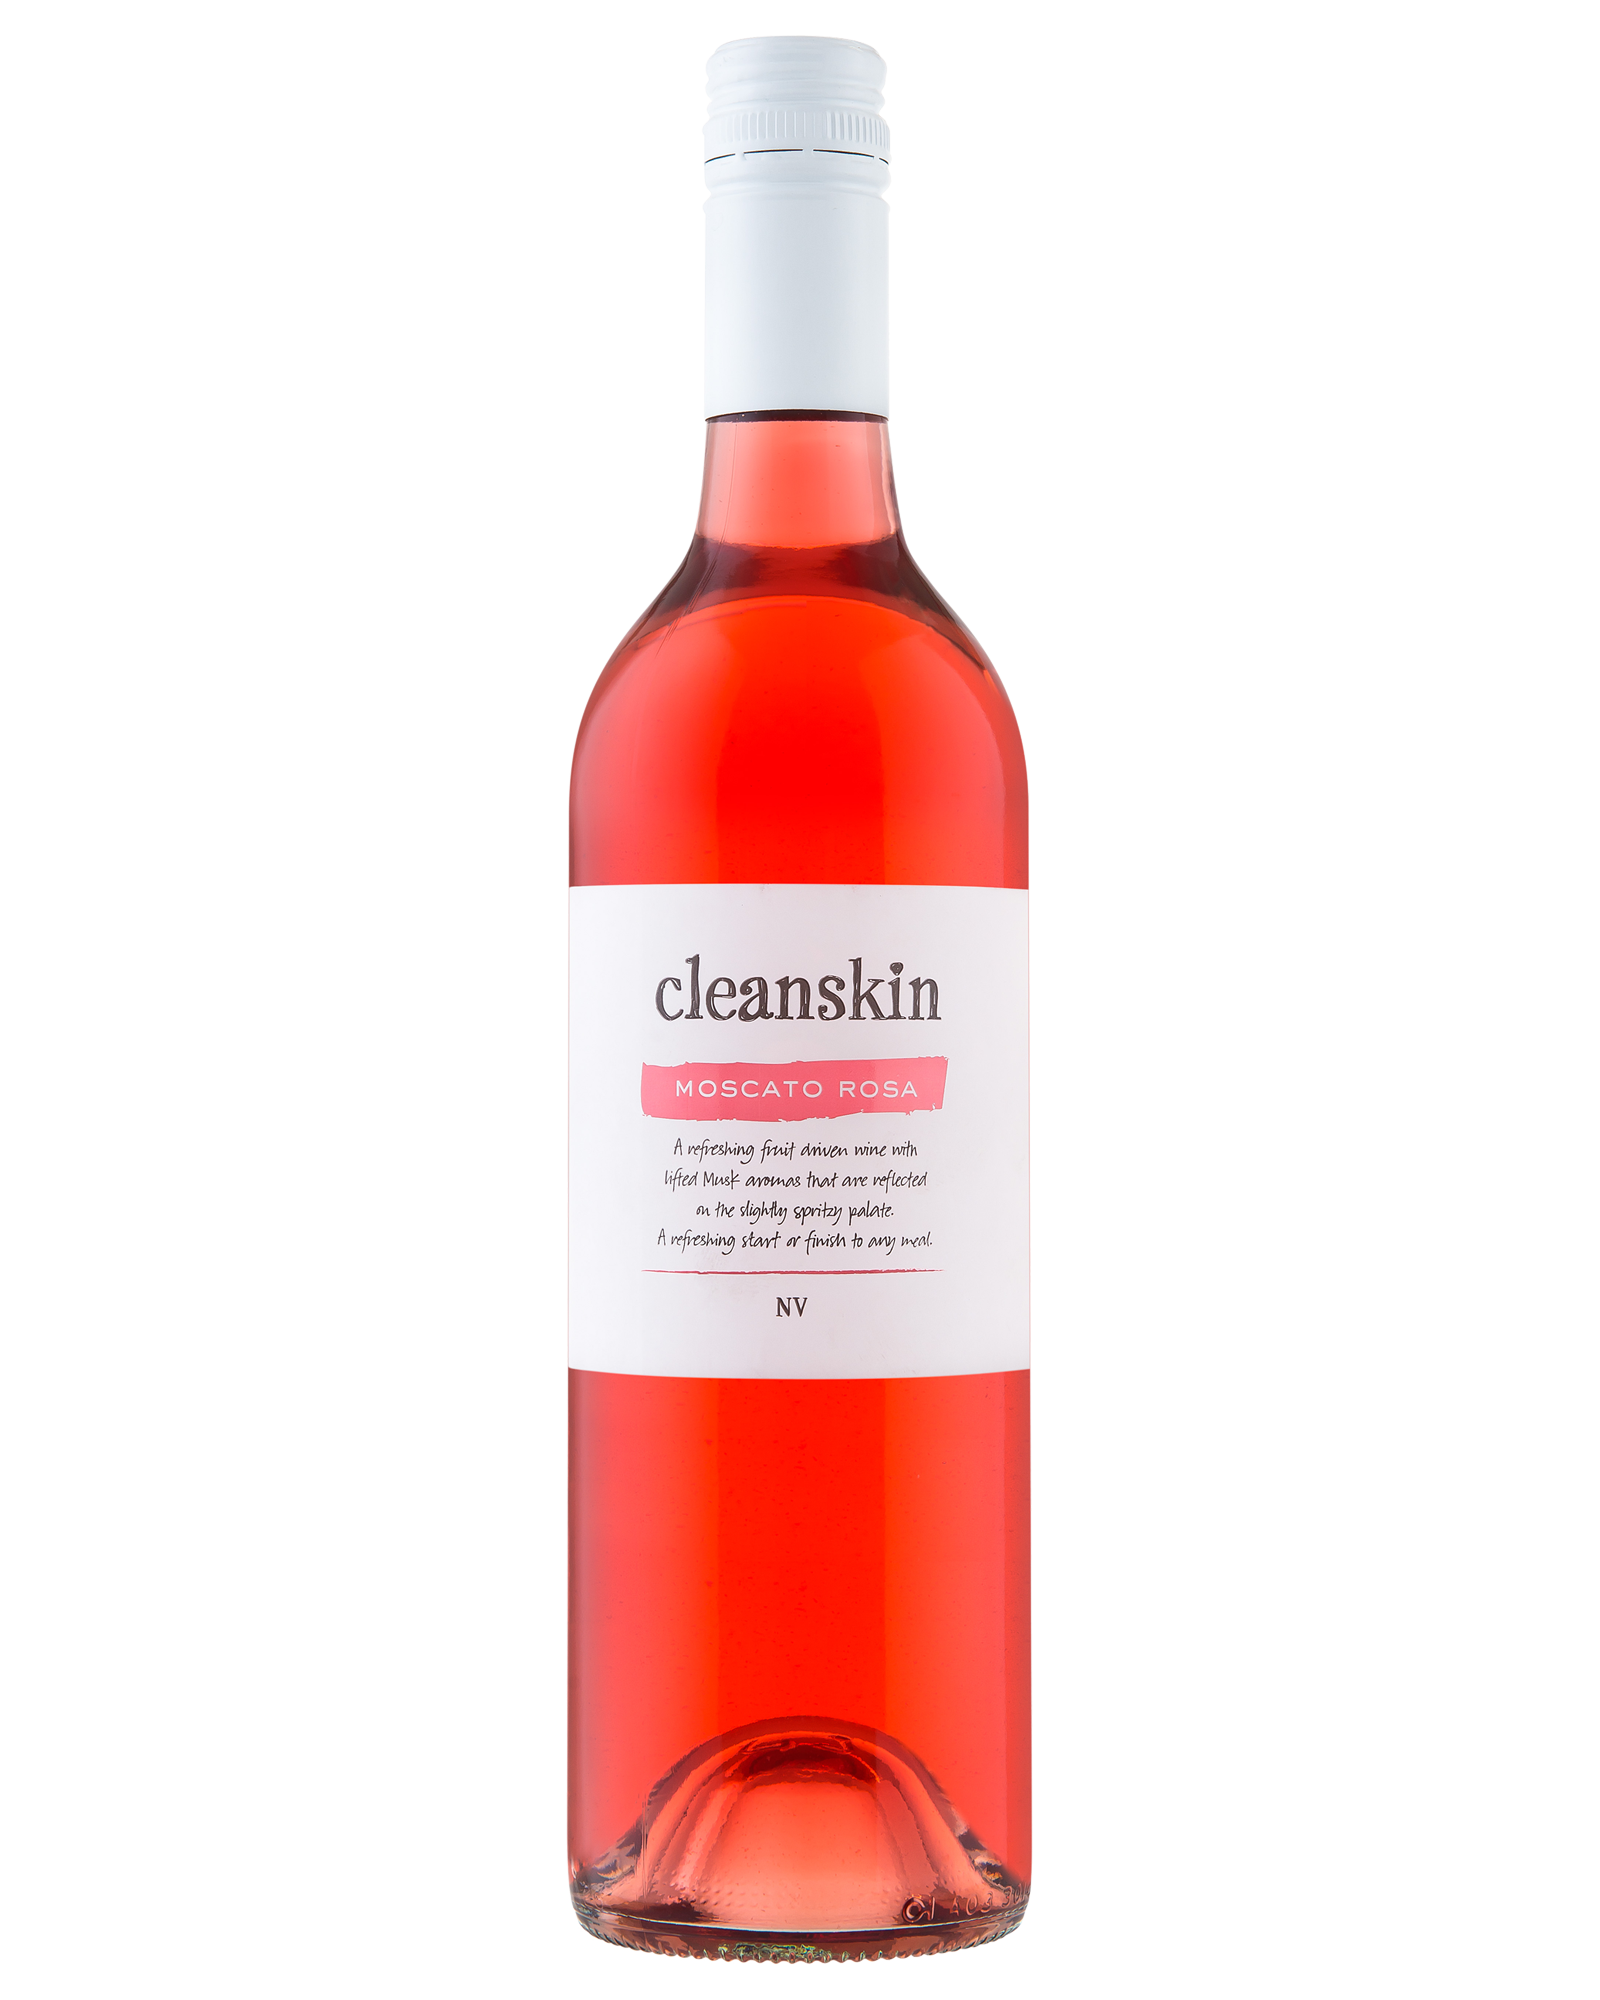 Cleanskin Moscato Rosa